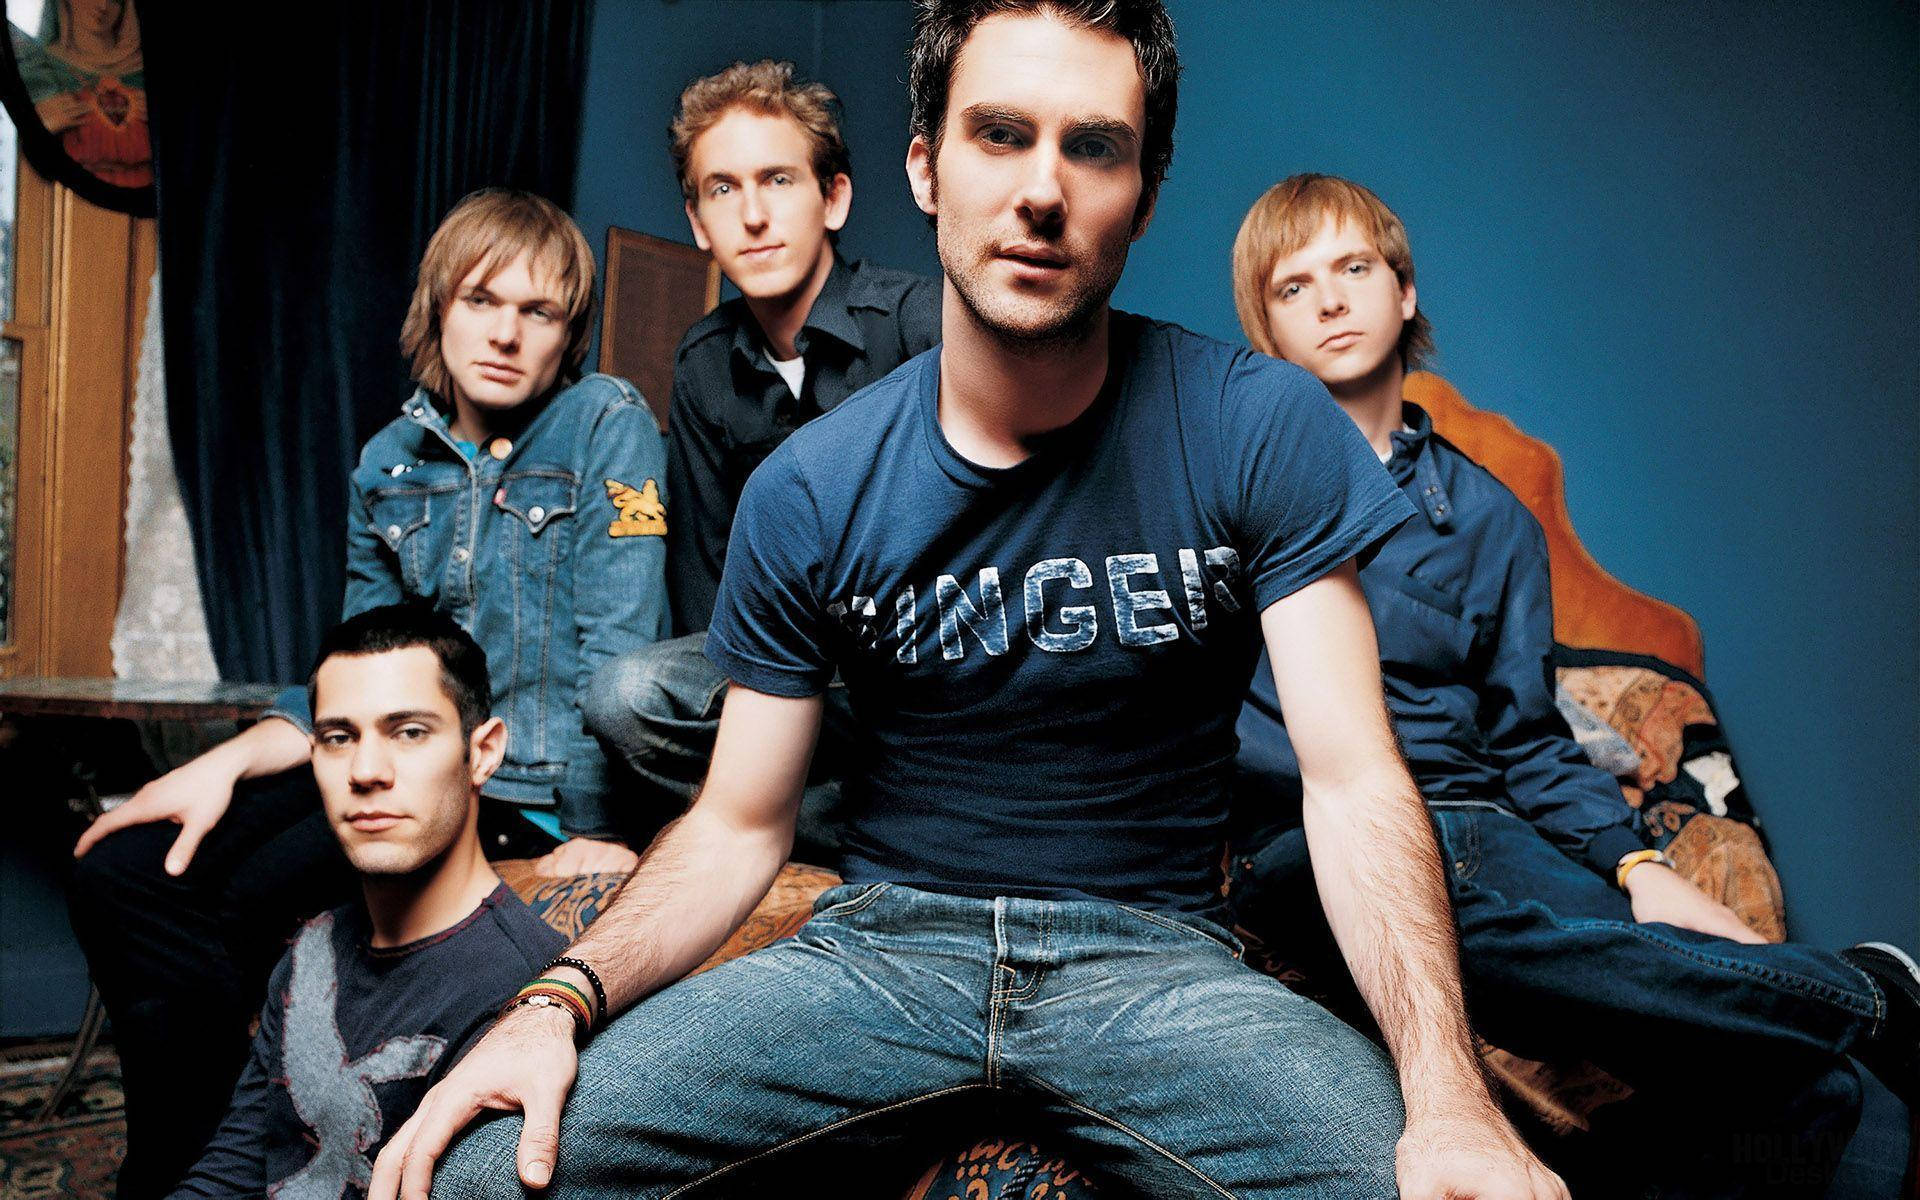 Caption: Maroon 5 Band Members In Blue Ensemble In A Blue Room Background